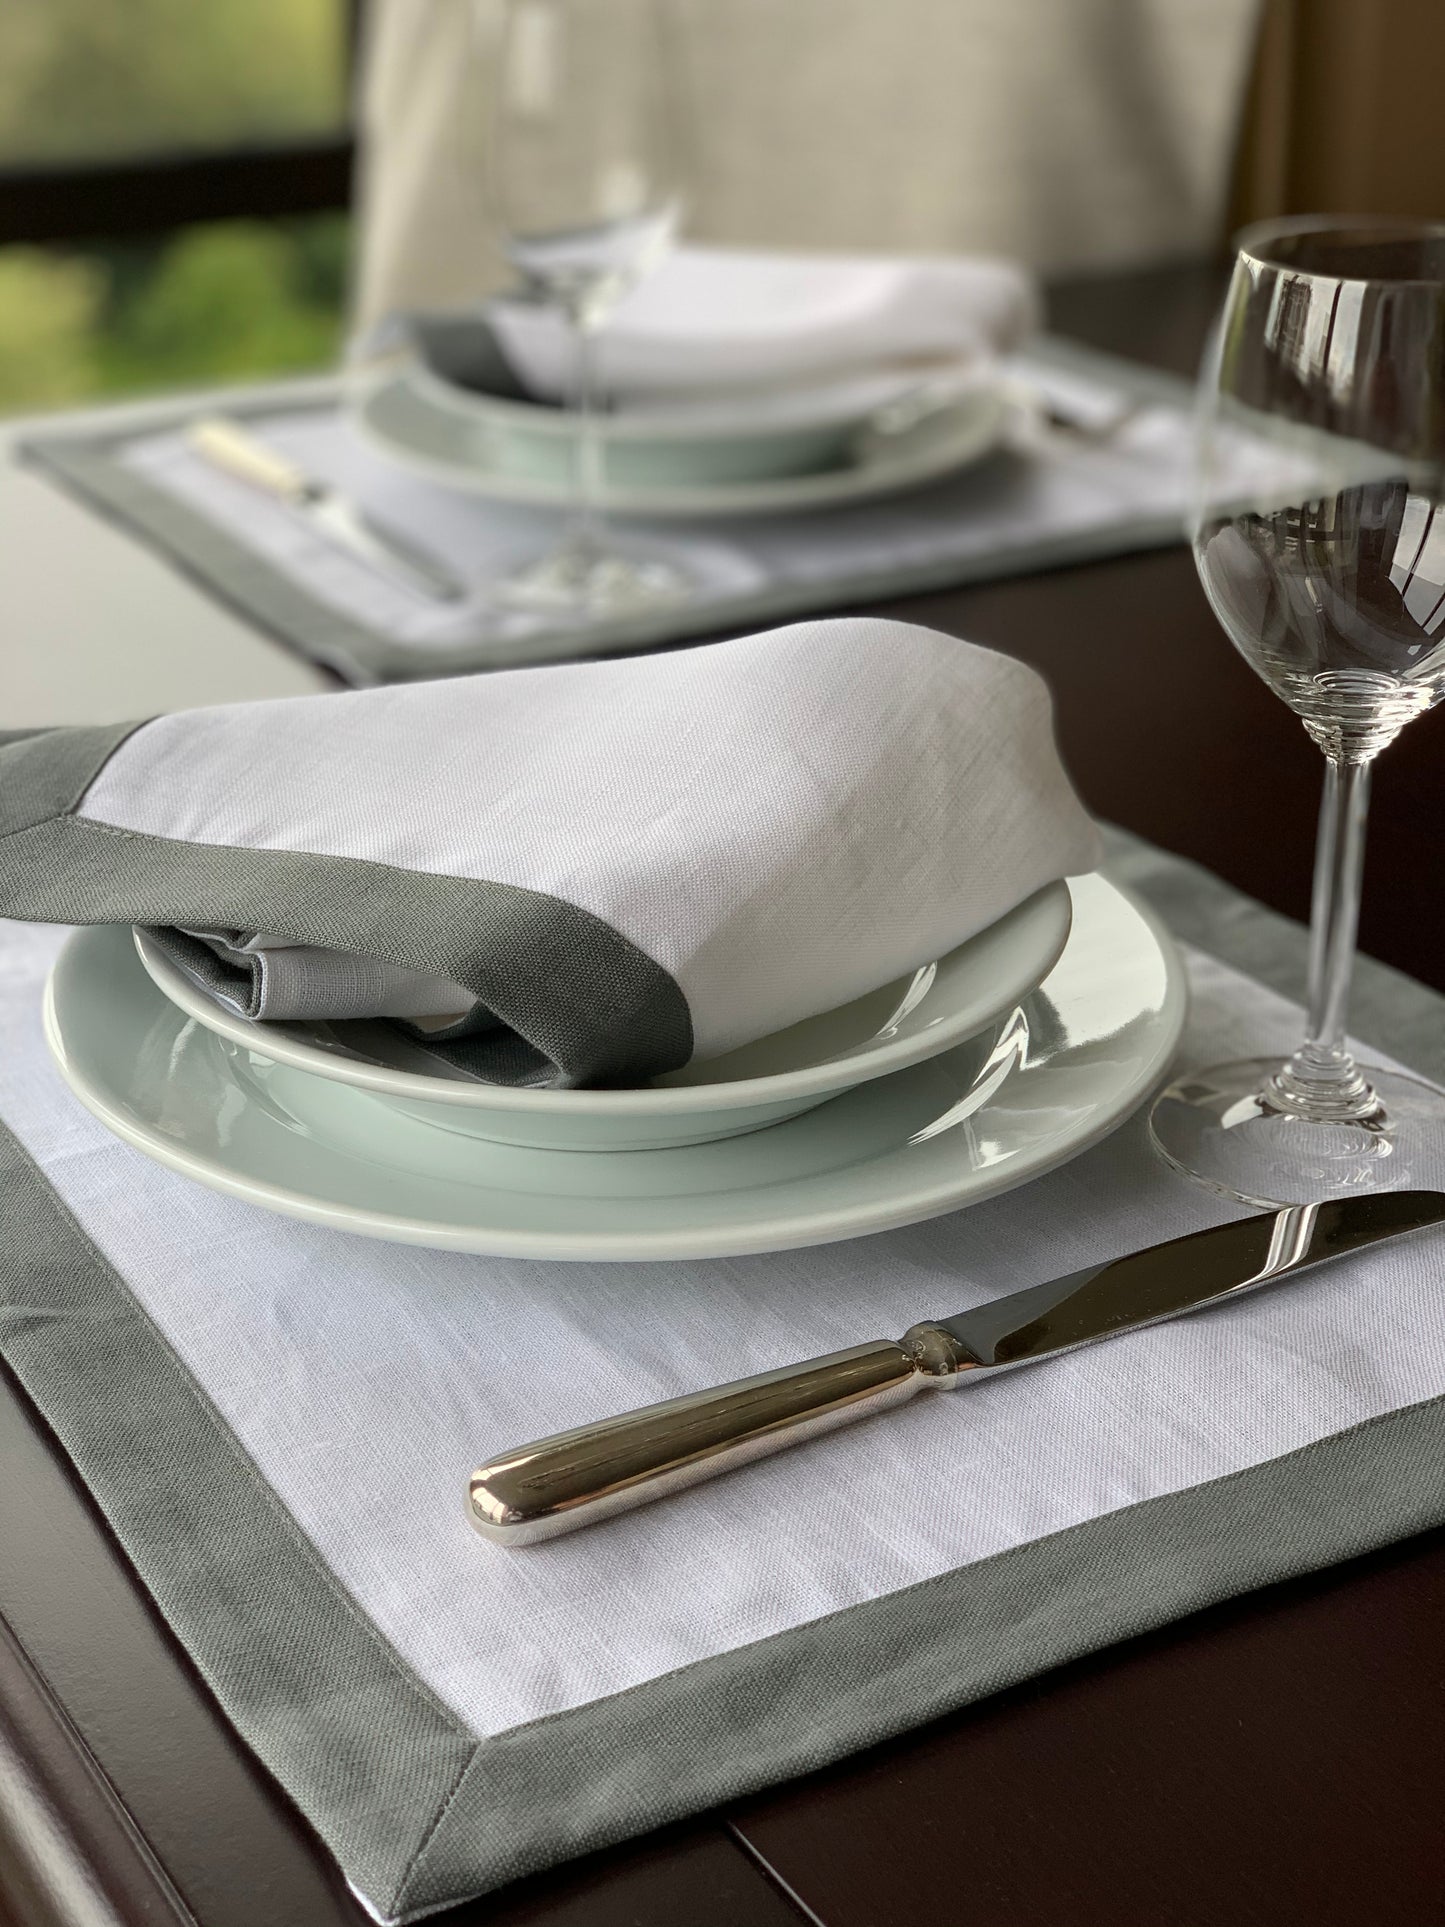 Contrast Border Placemat Grey/White